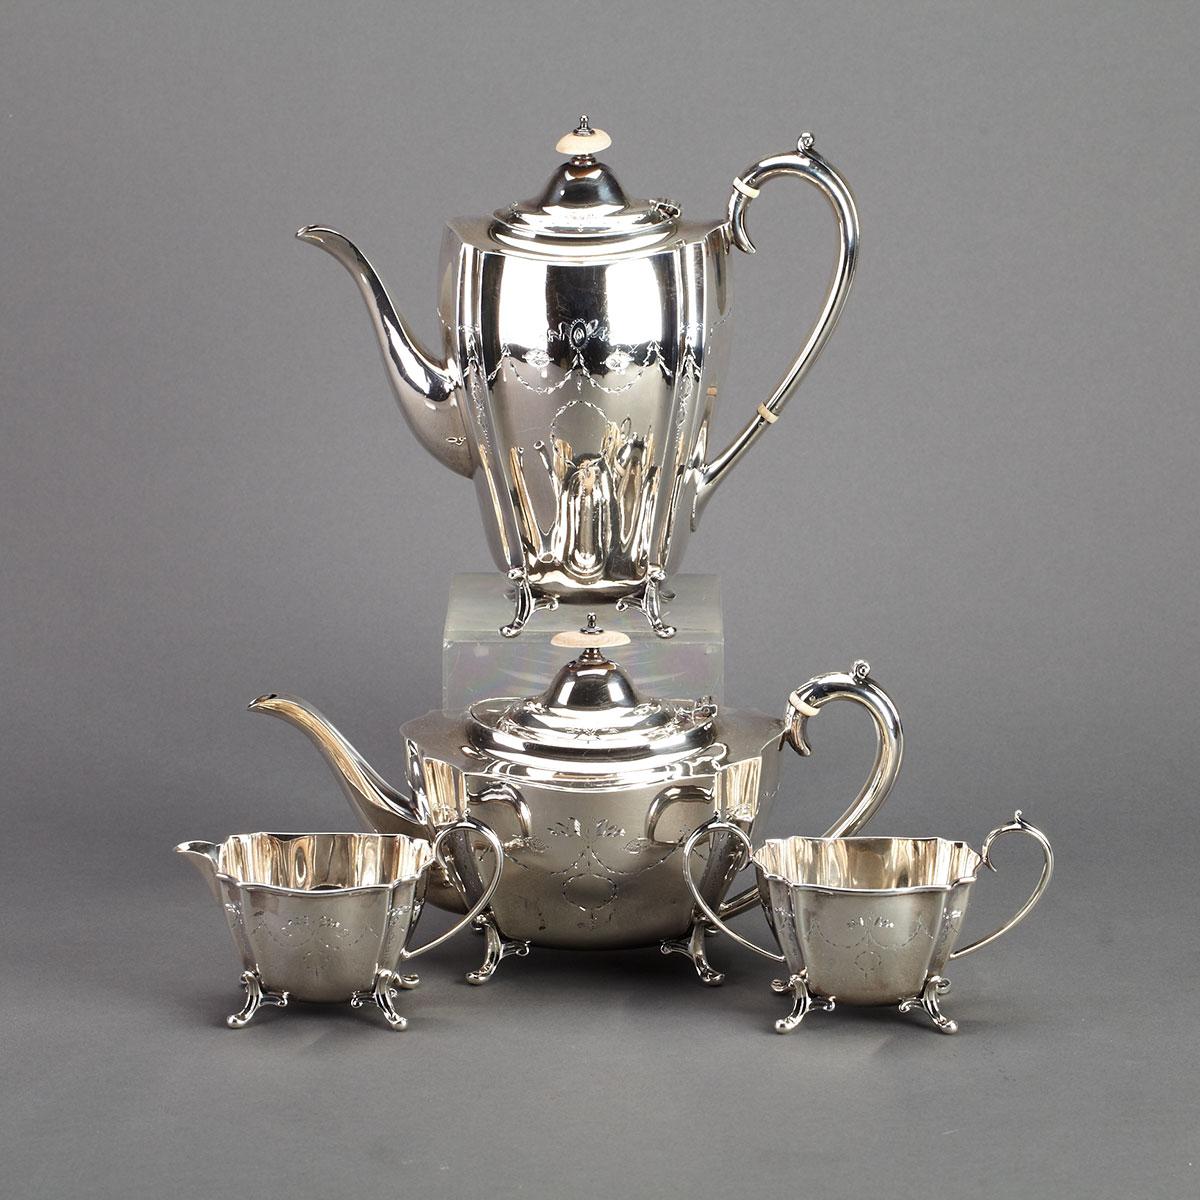 English Silver Tea and Coffee Service, Cooper Bros. & Sons, Sheffield, 1922-23